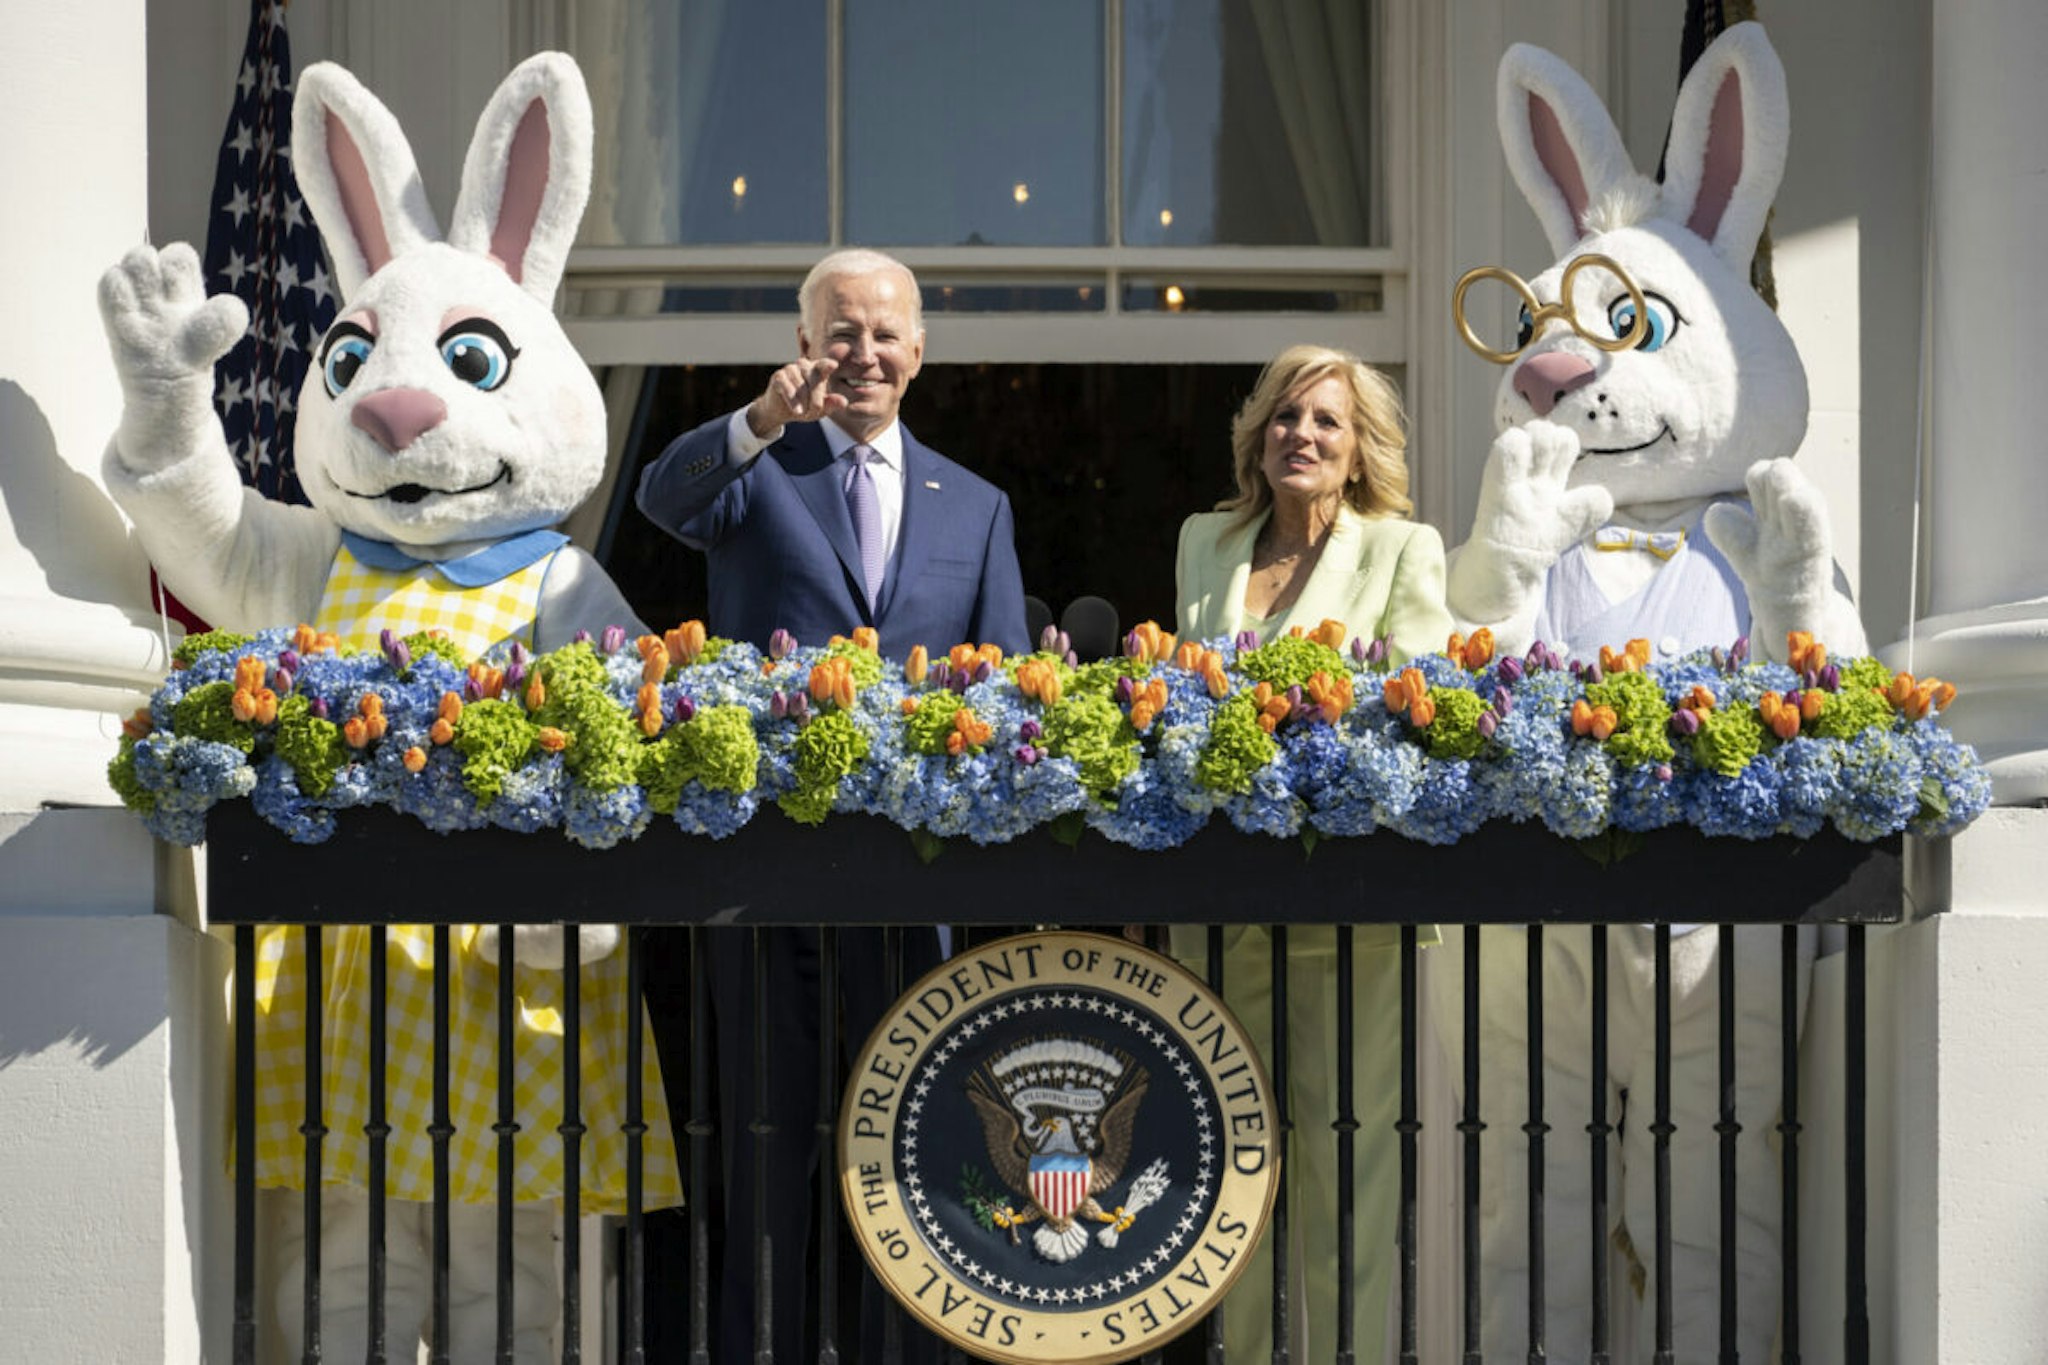 WASHINGTON, DC - APRIL 10: U.S. President Joe Biden and first lady Jill Biden attend the annual Easter Egg Roll on the South Lawn of the White House on April 10, 2023 in Washington, DC. The tradition dates back to 1878 when President Rutherford B. Hayes invited children to the White House for Easter and egg rolling on the lawn.